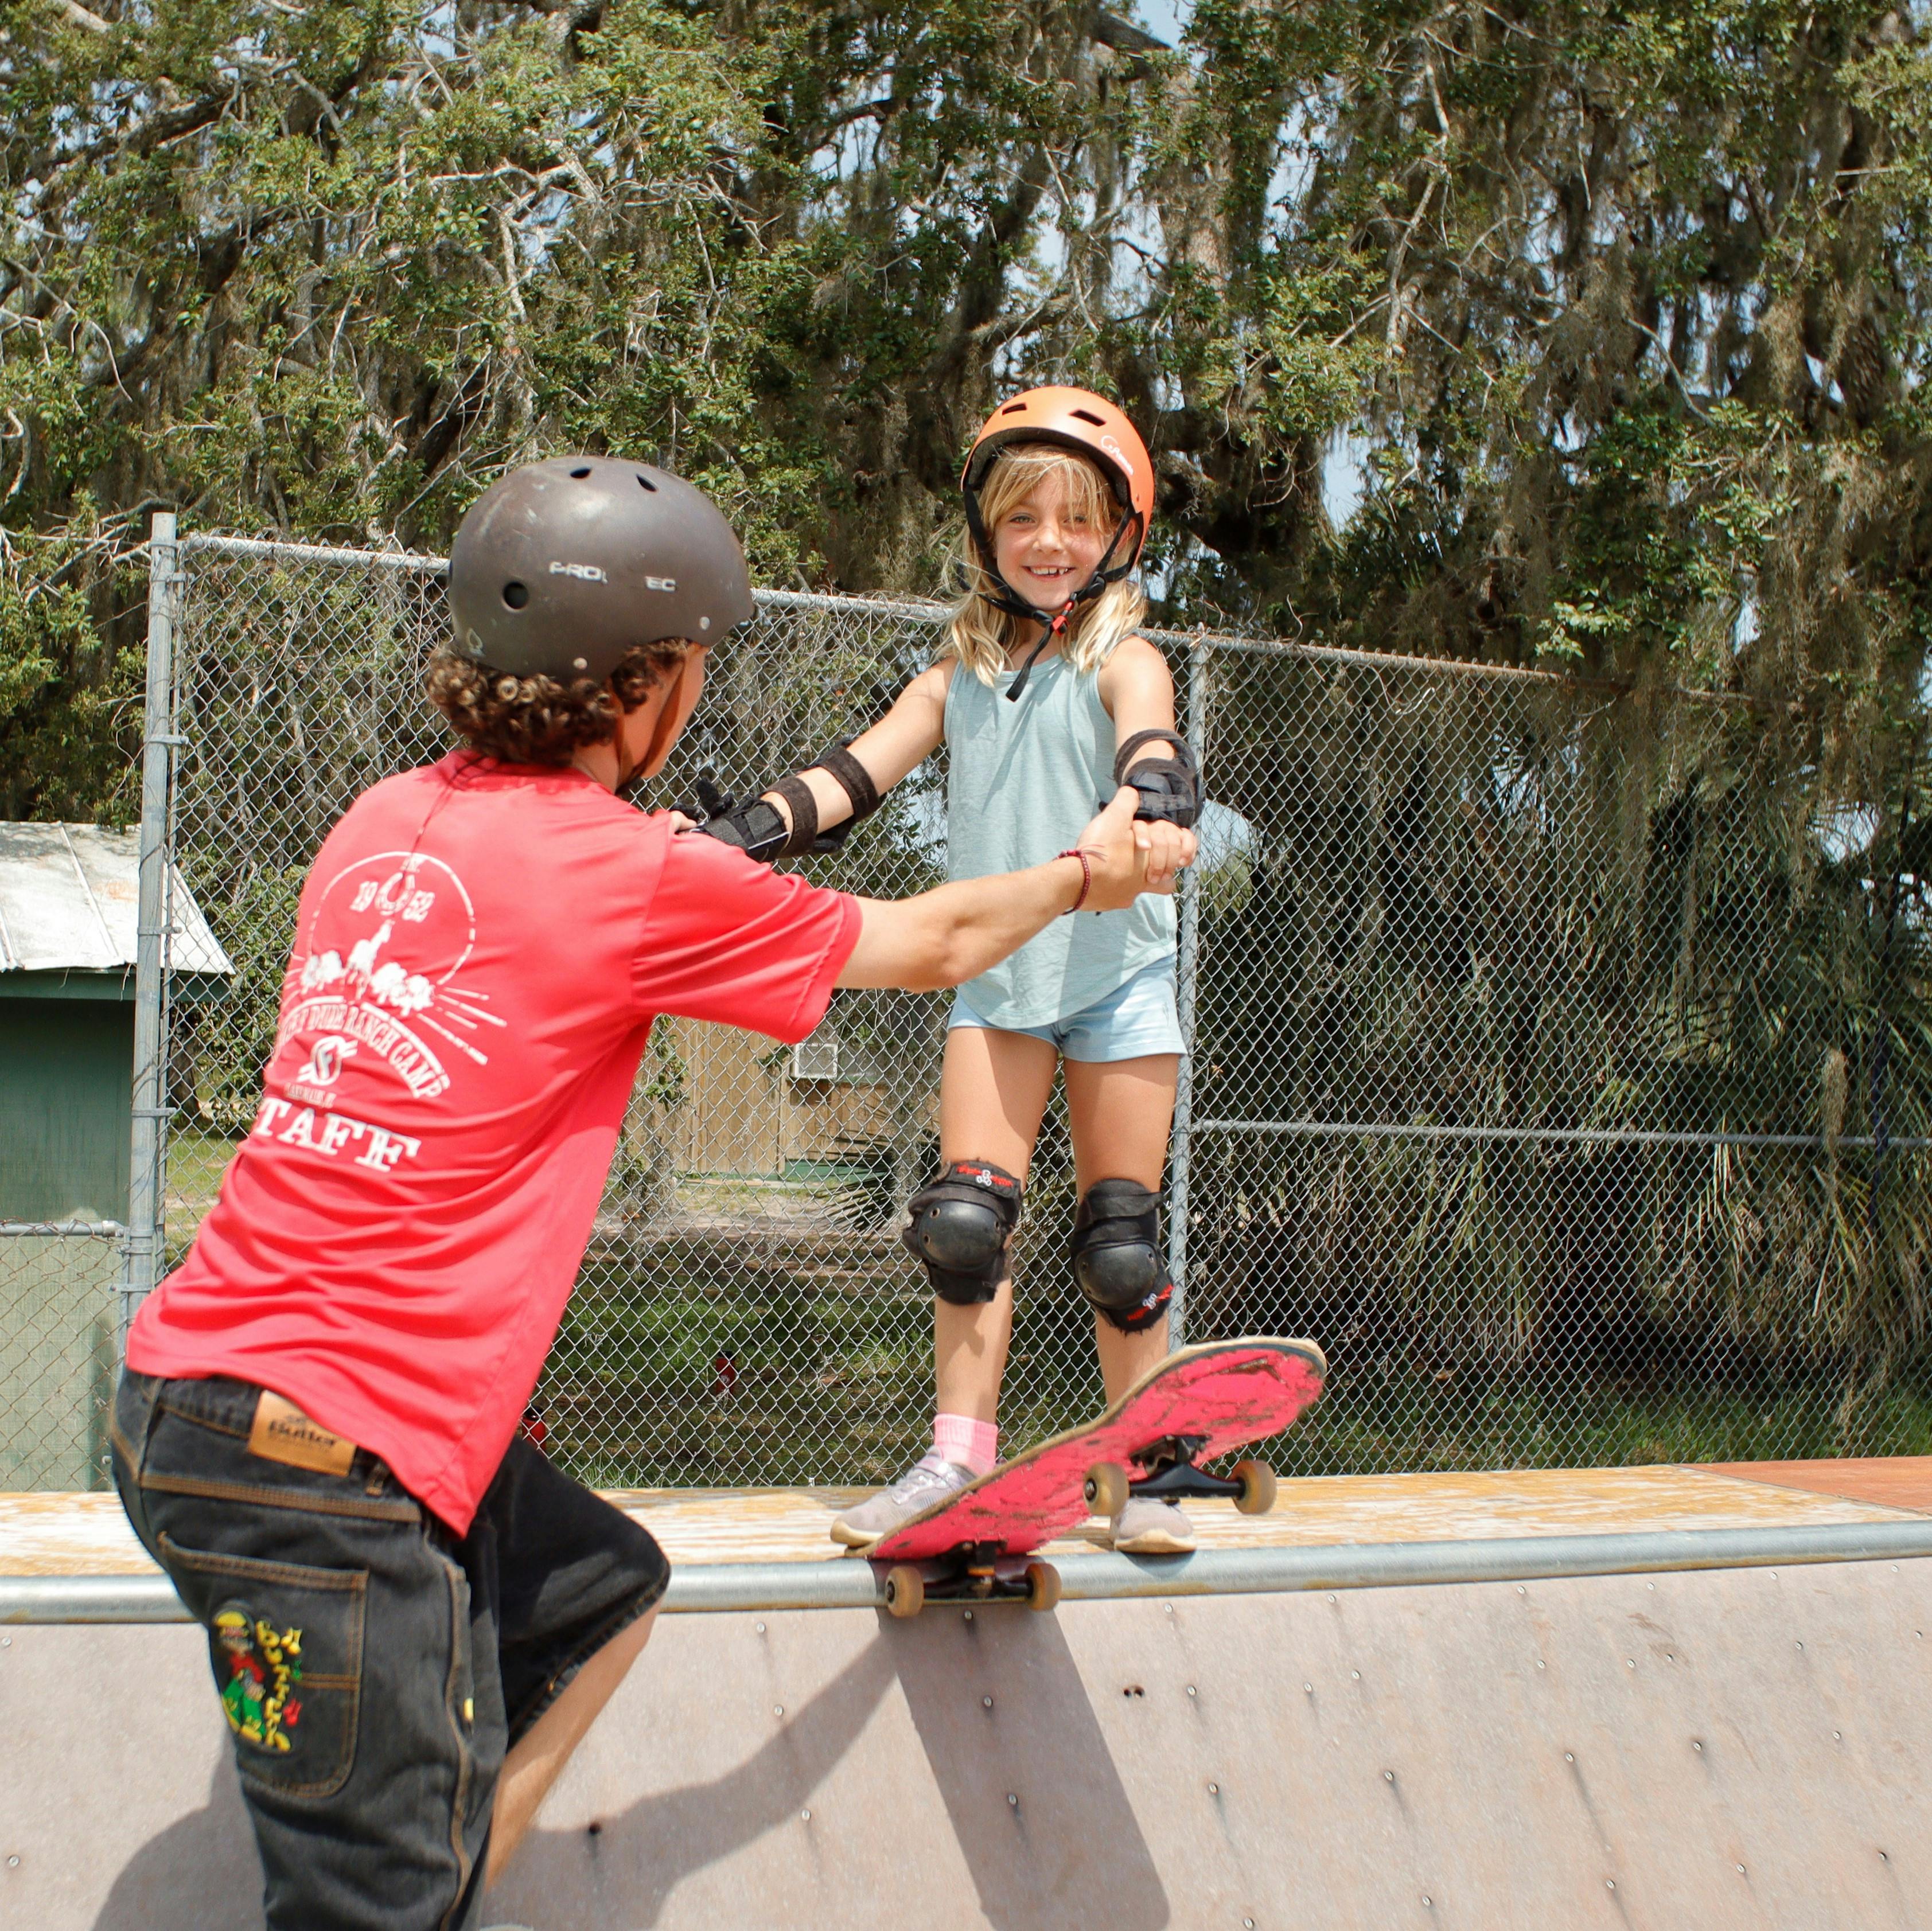 Fun at Our Overnight Skateboarding Camp